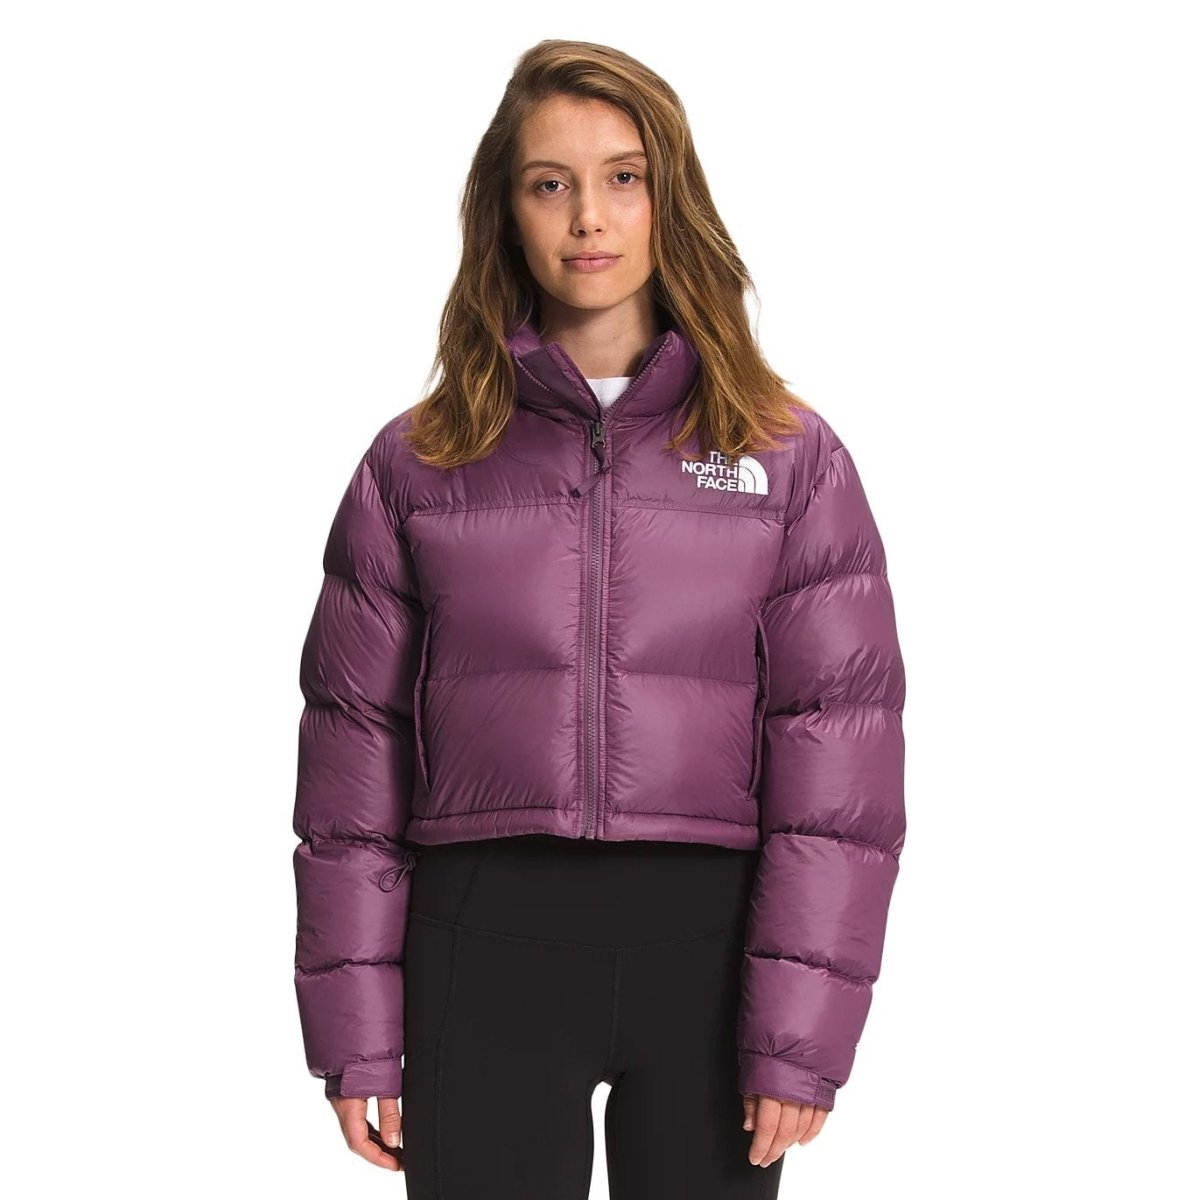 North Face Women's Pikes Purple - West NYC